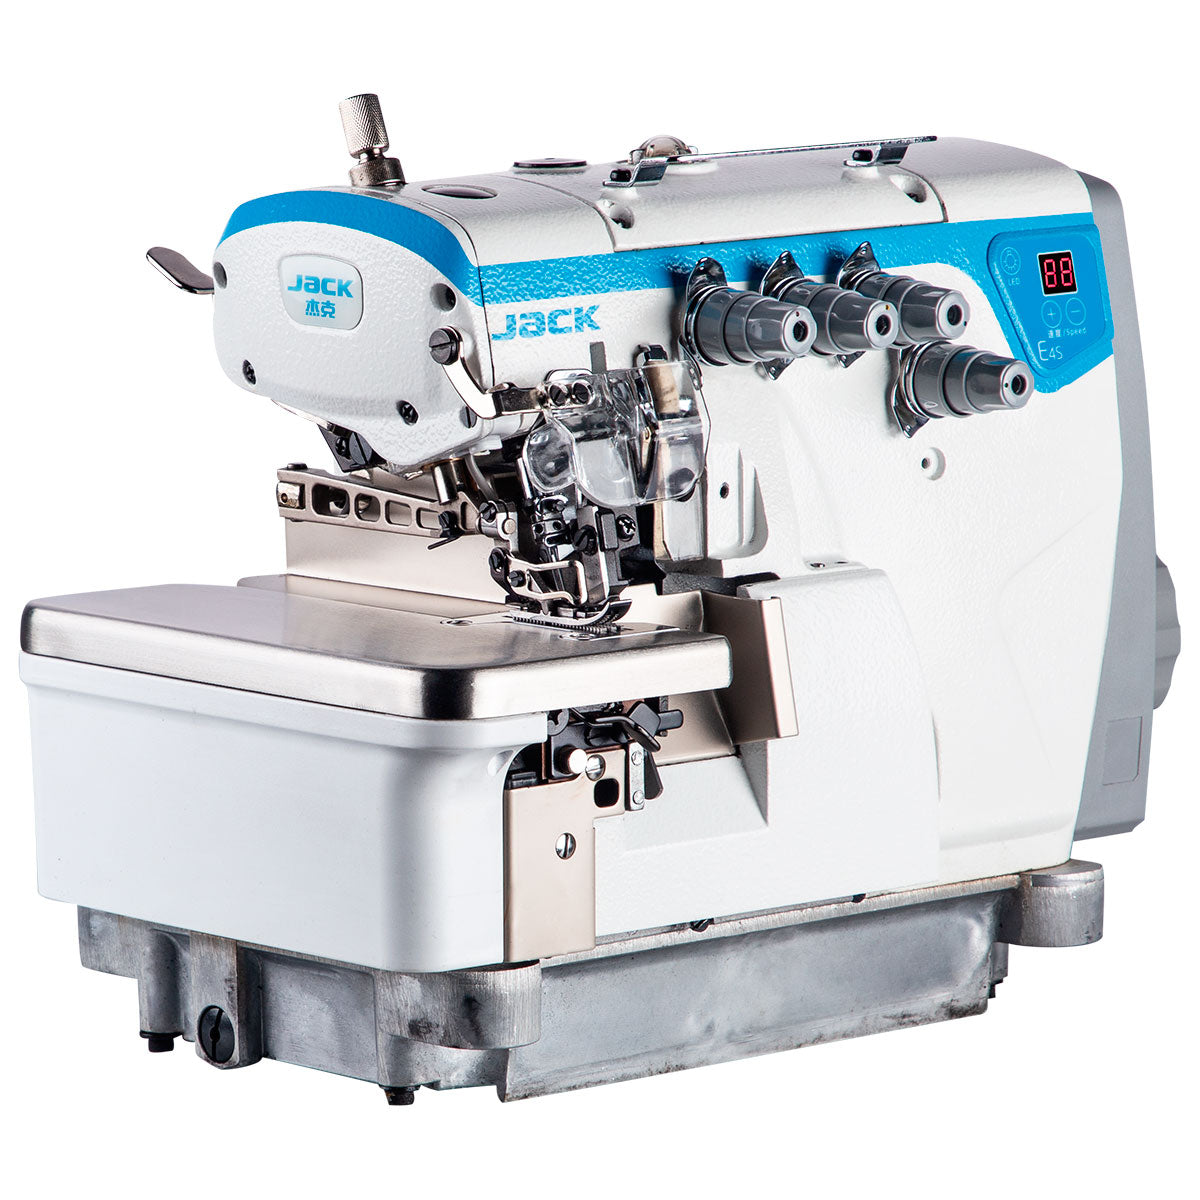 JACK E4S-4-M03/333 4 Thread Overlock Industrial Sewing Machine Assembled with Fully Submerged Table Setup Included